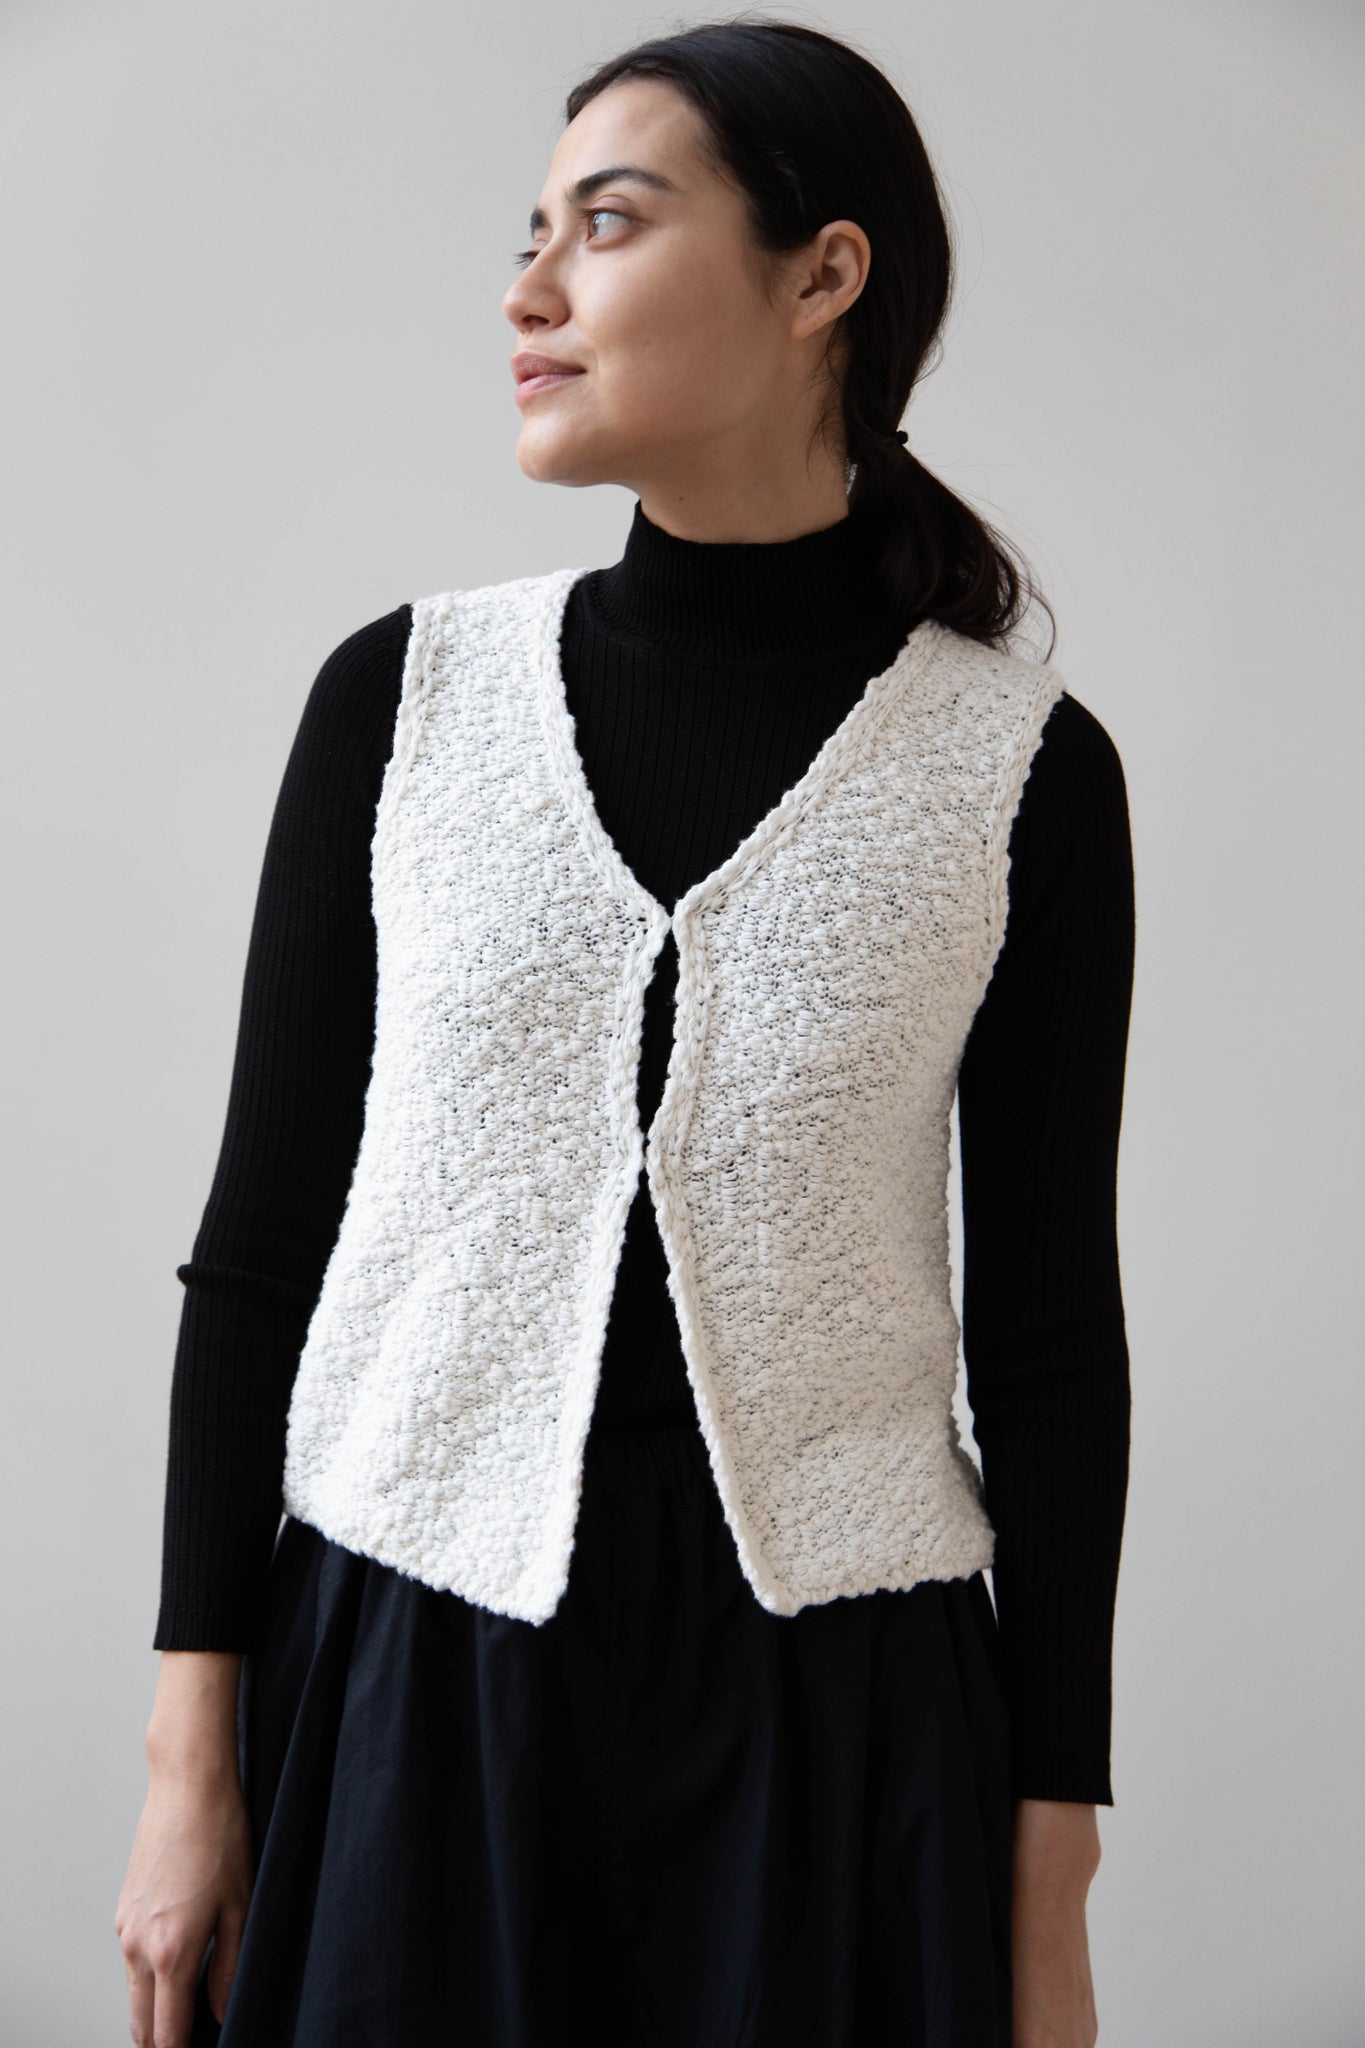 Missing You Already | Cotton Knit Vest in Ivory